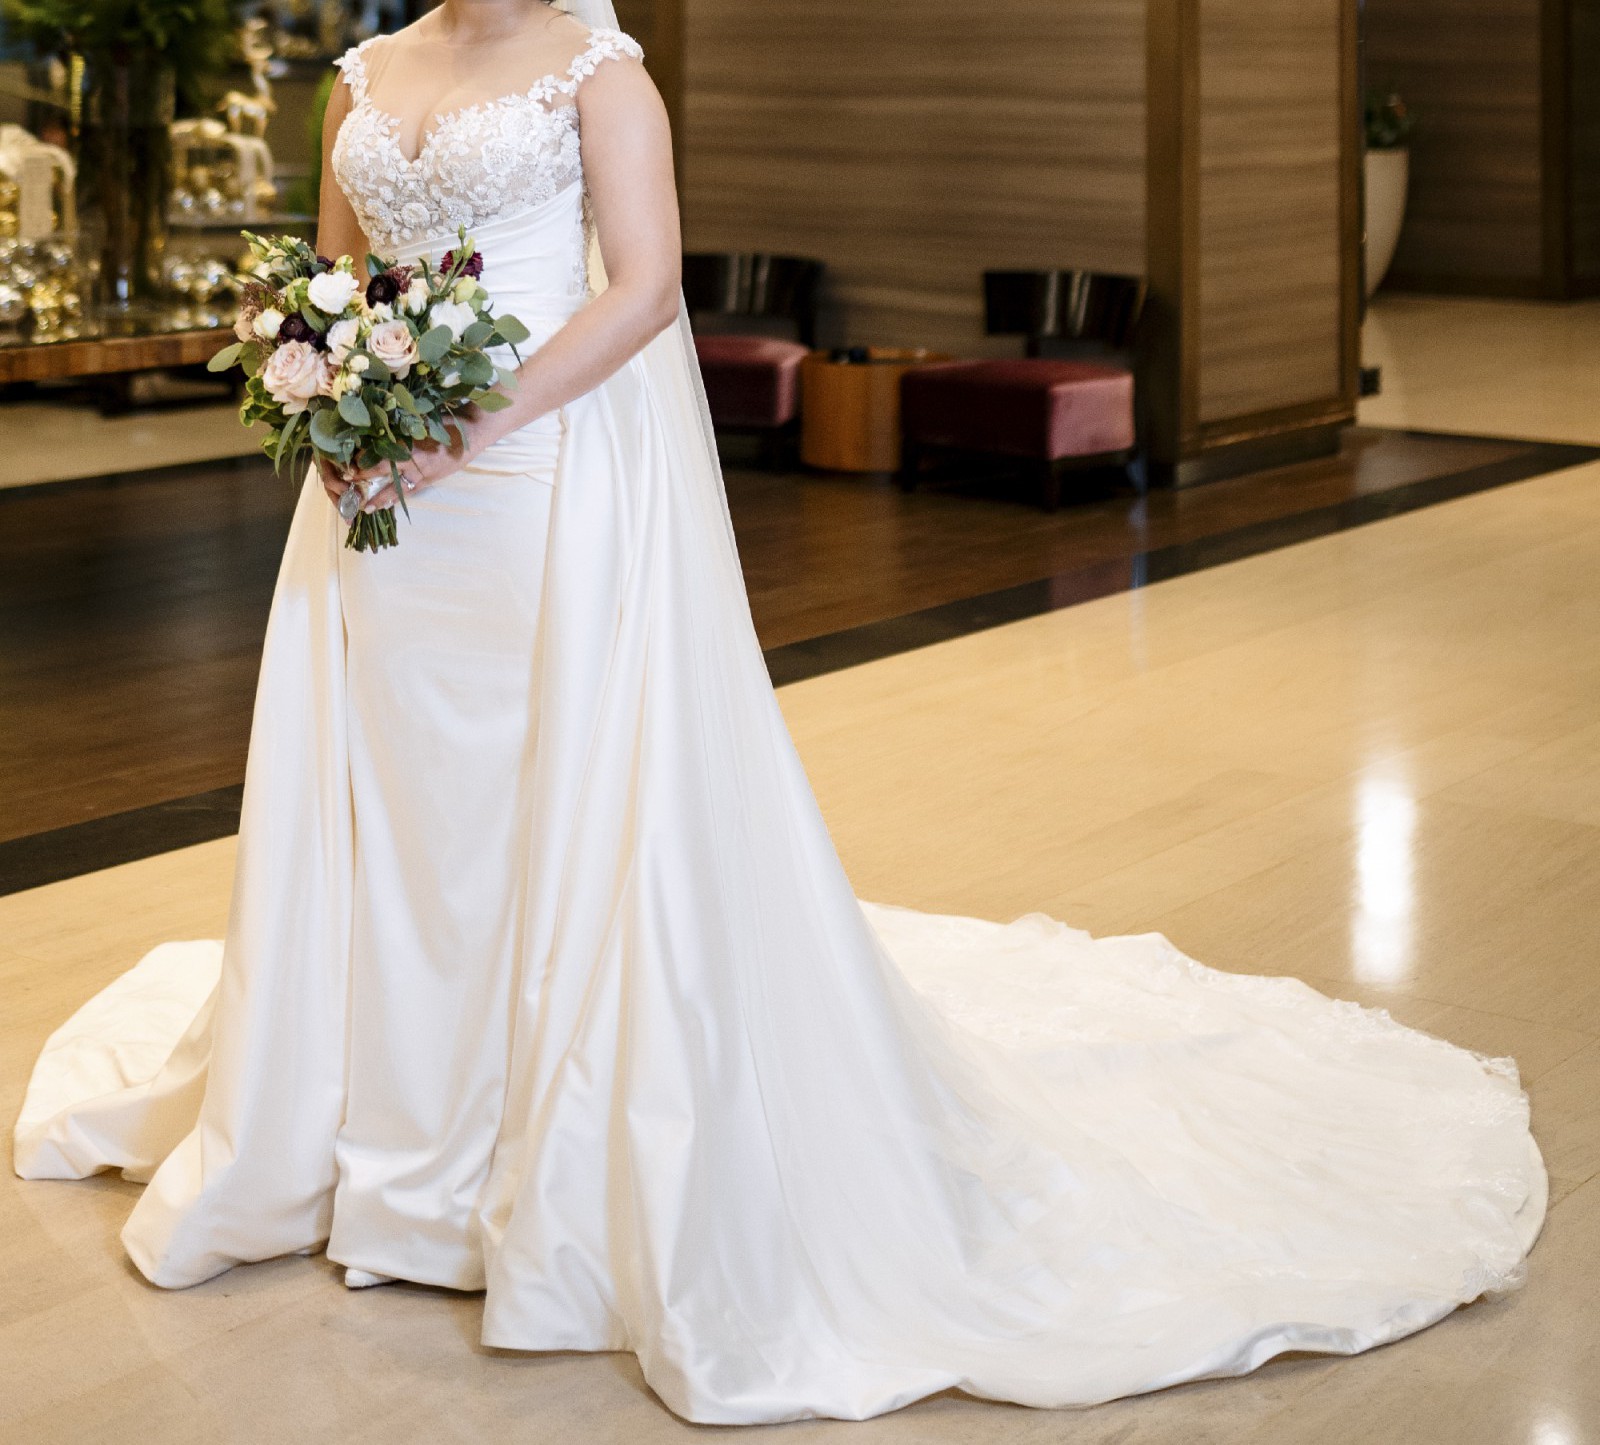 Simple Cathedral Veil by Everly